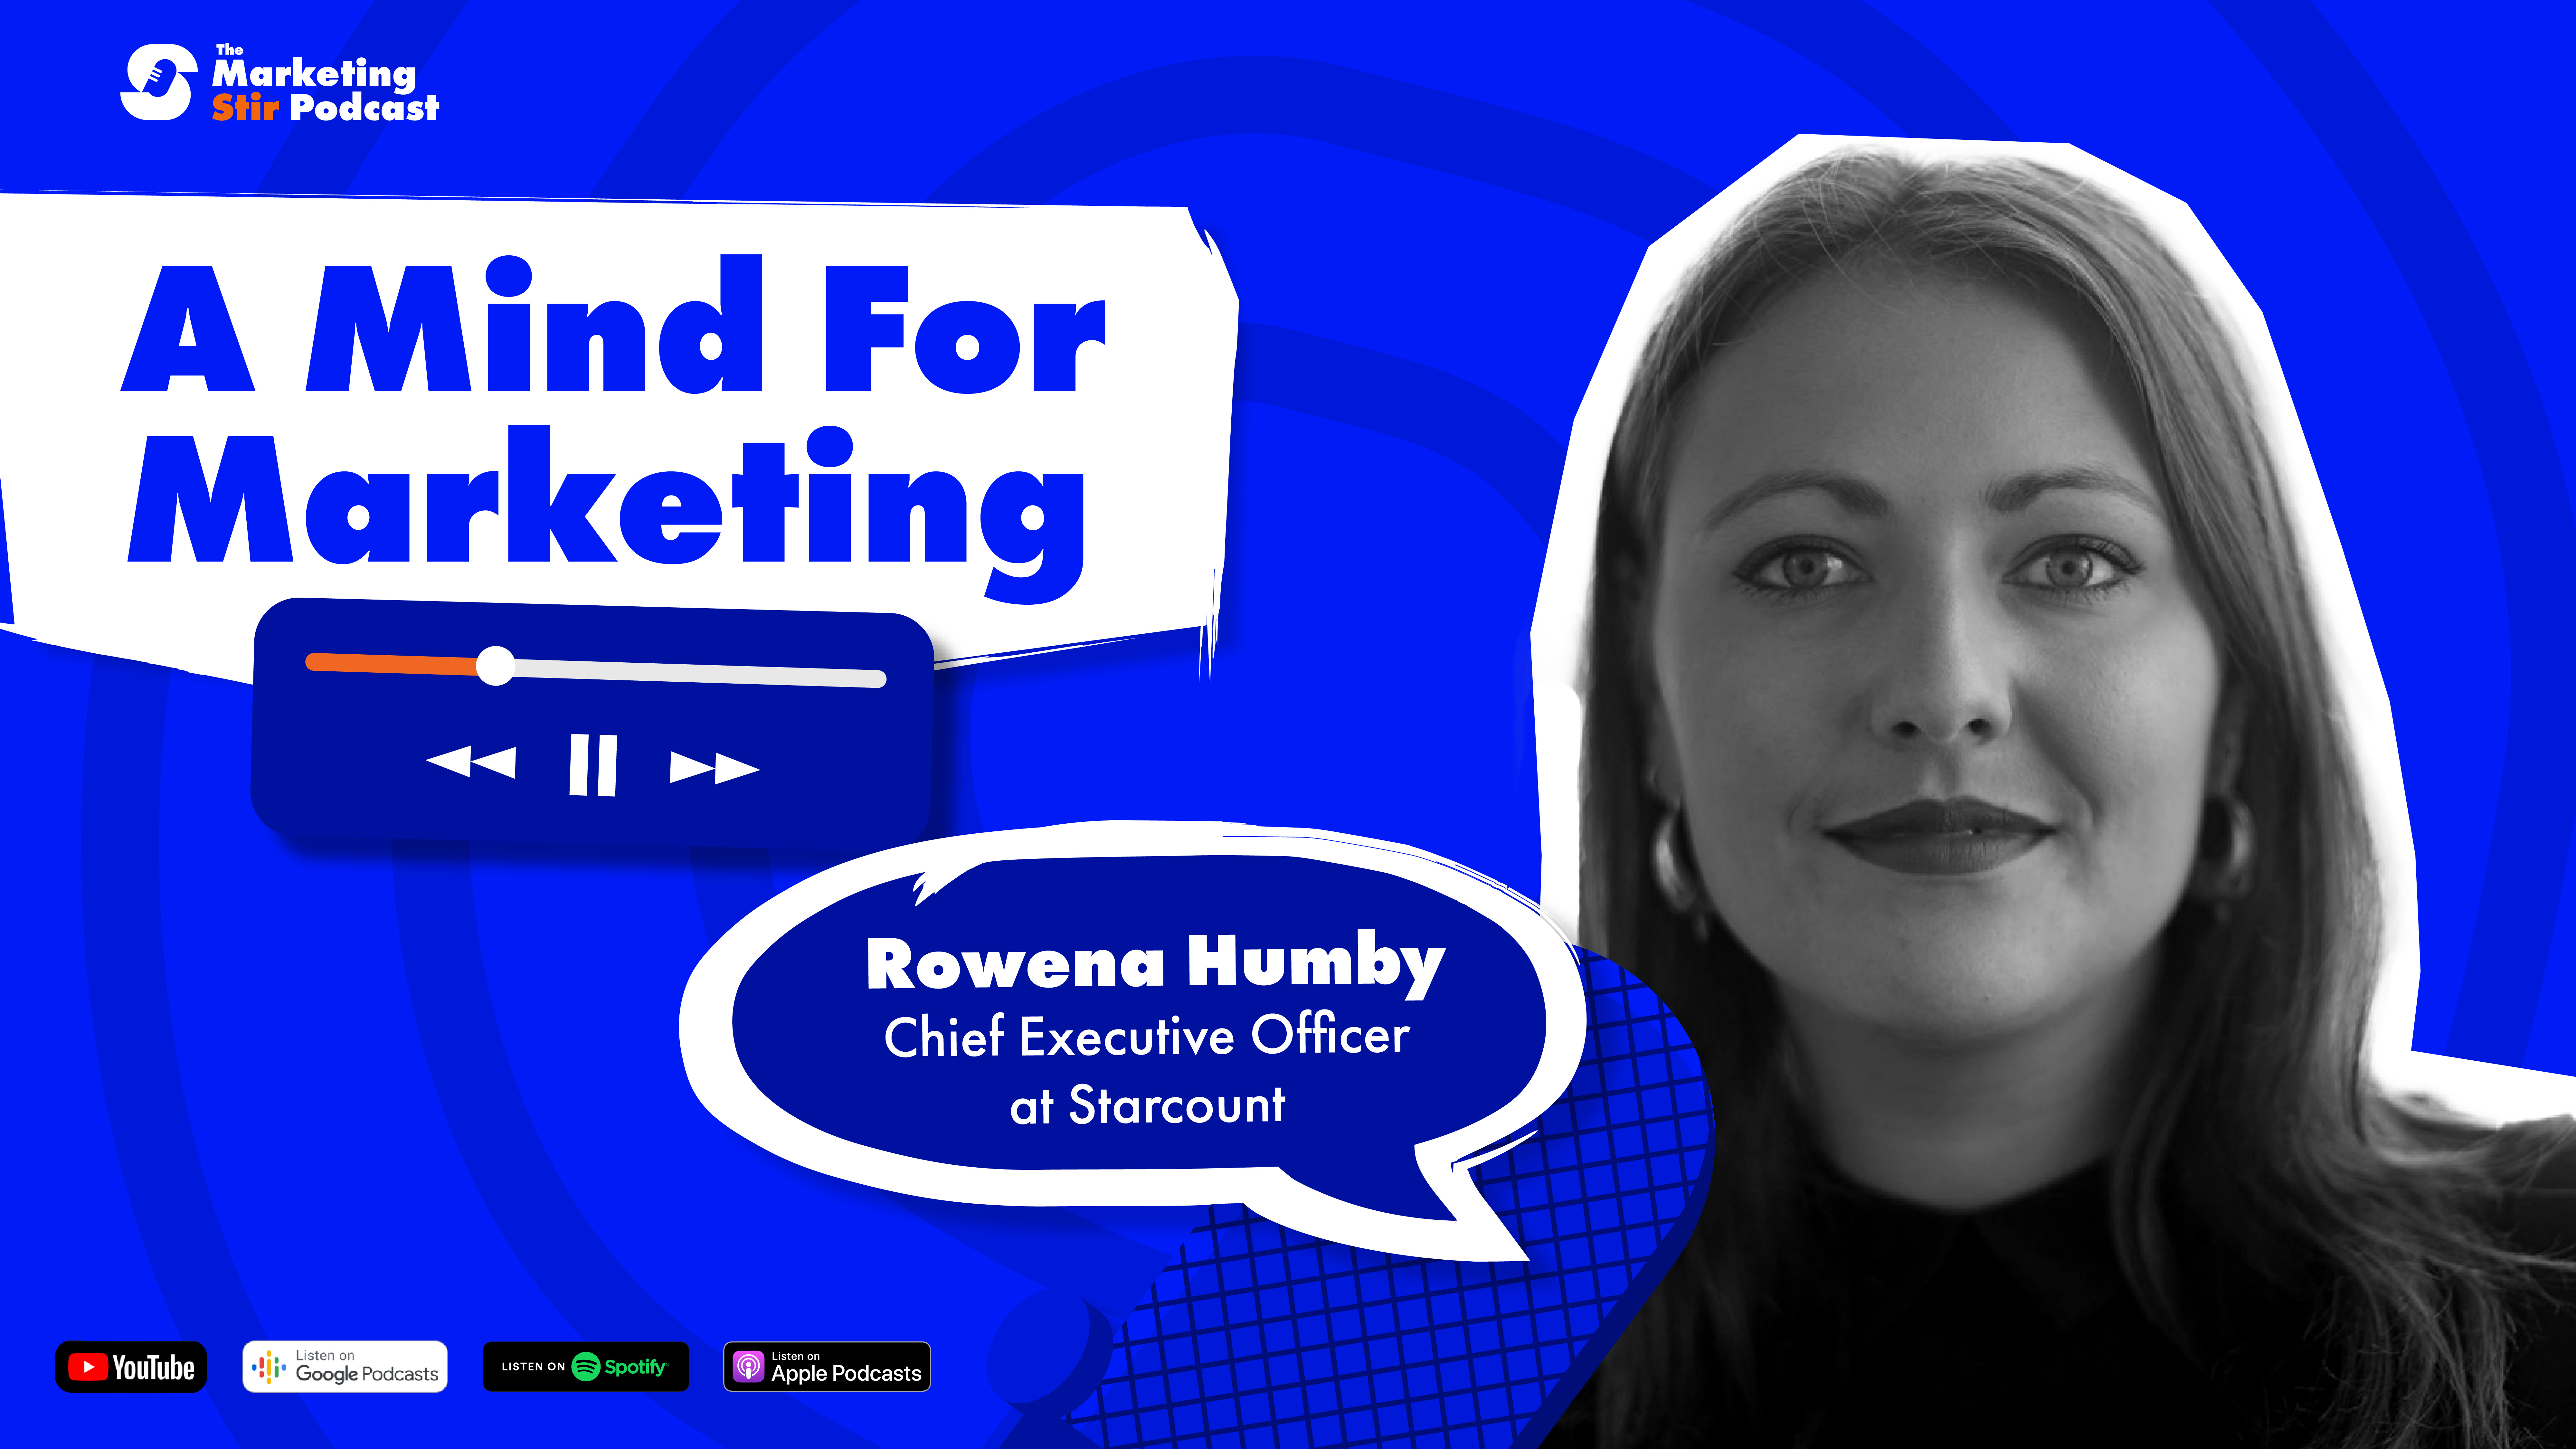 Rowena Humby (Starcount) - A Mind For Marketing